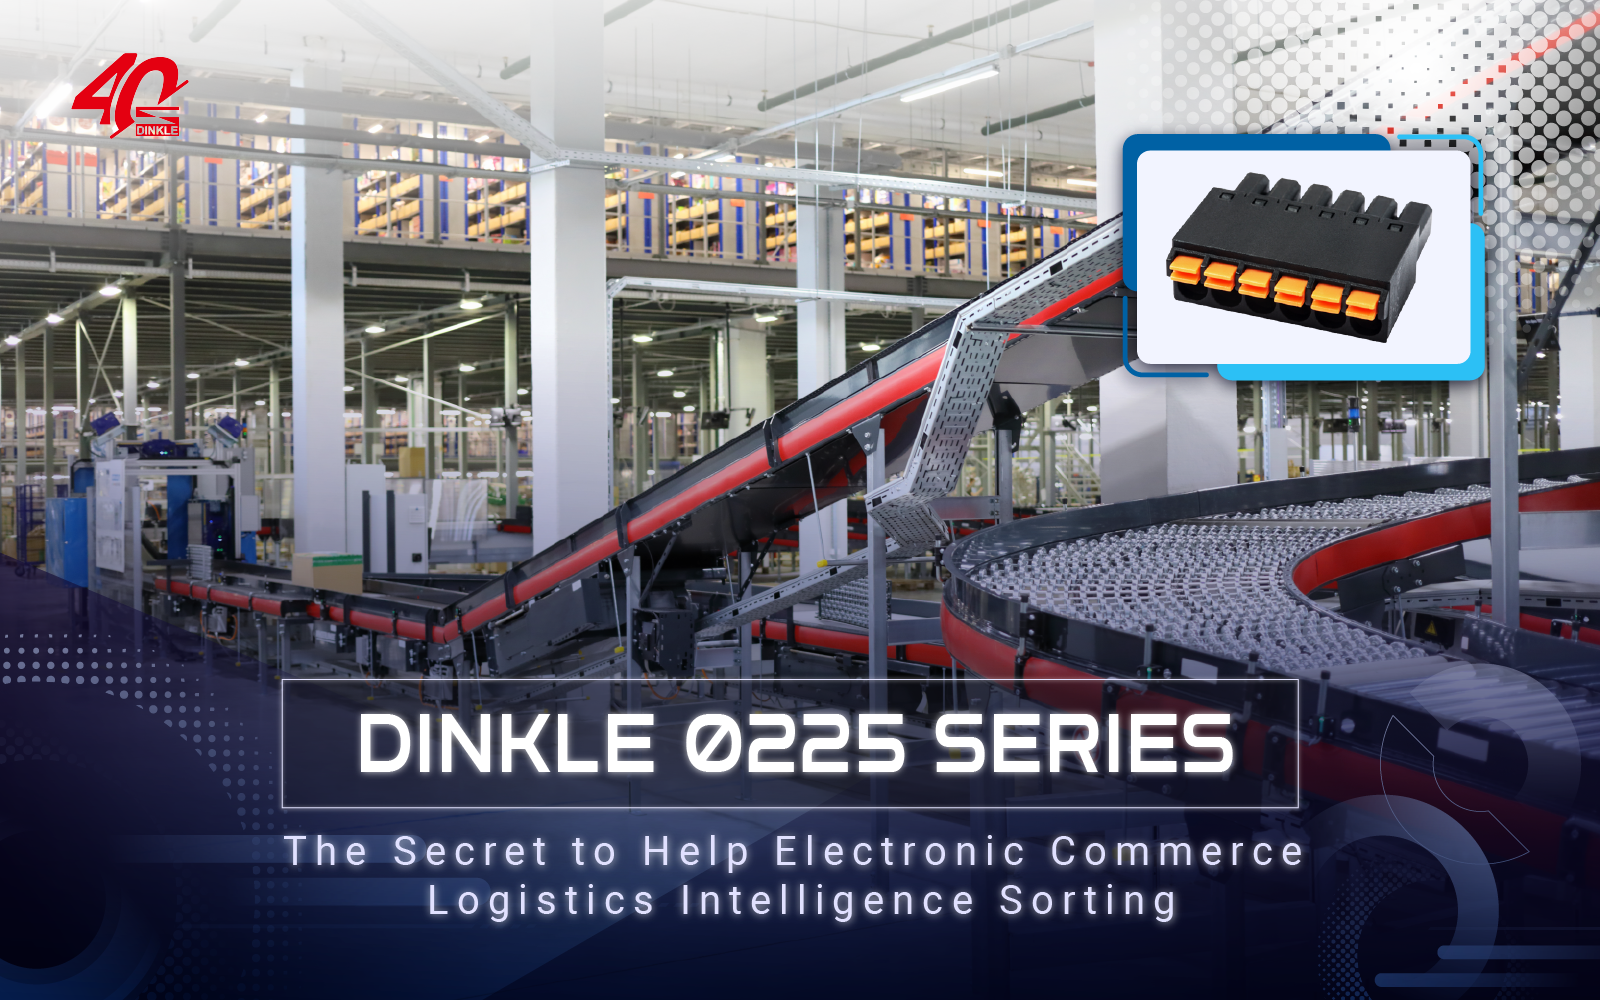 Dinkle 0225 series 
The Secret to Help Electronic Commerce Logistics 
Intelligence Sorting
